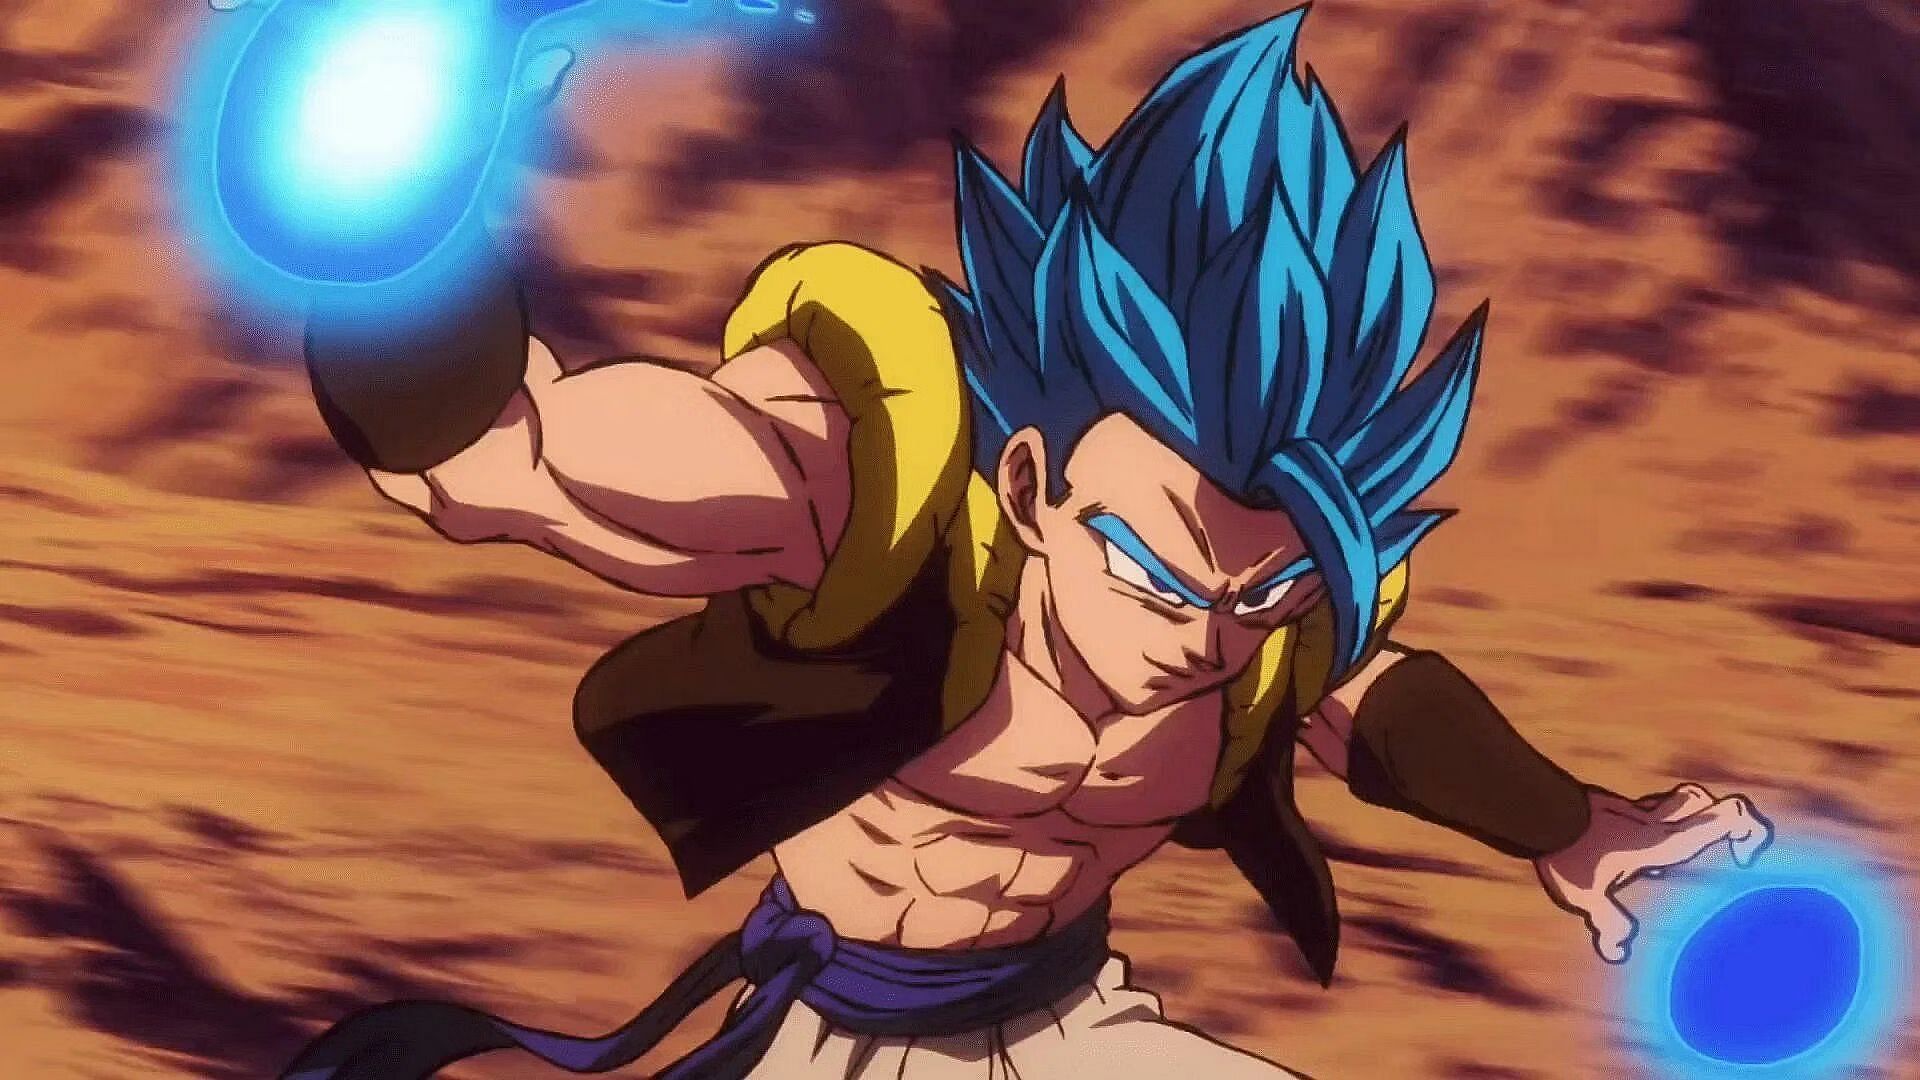 Gogeta as shown in the anime (Image via Toei Animation)